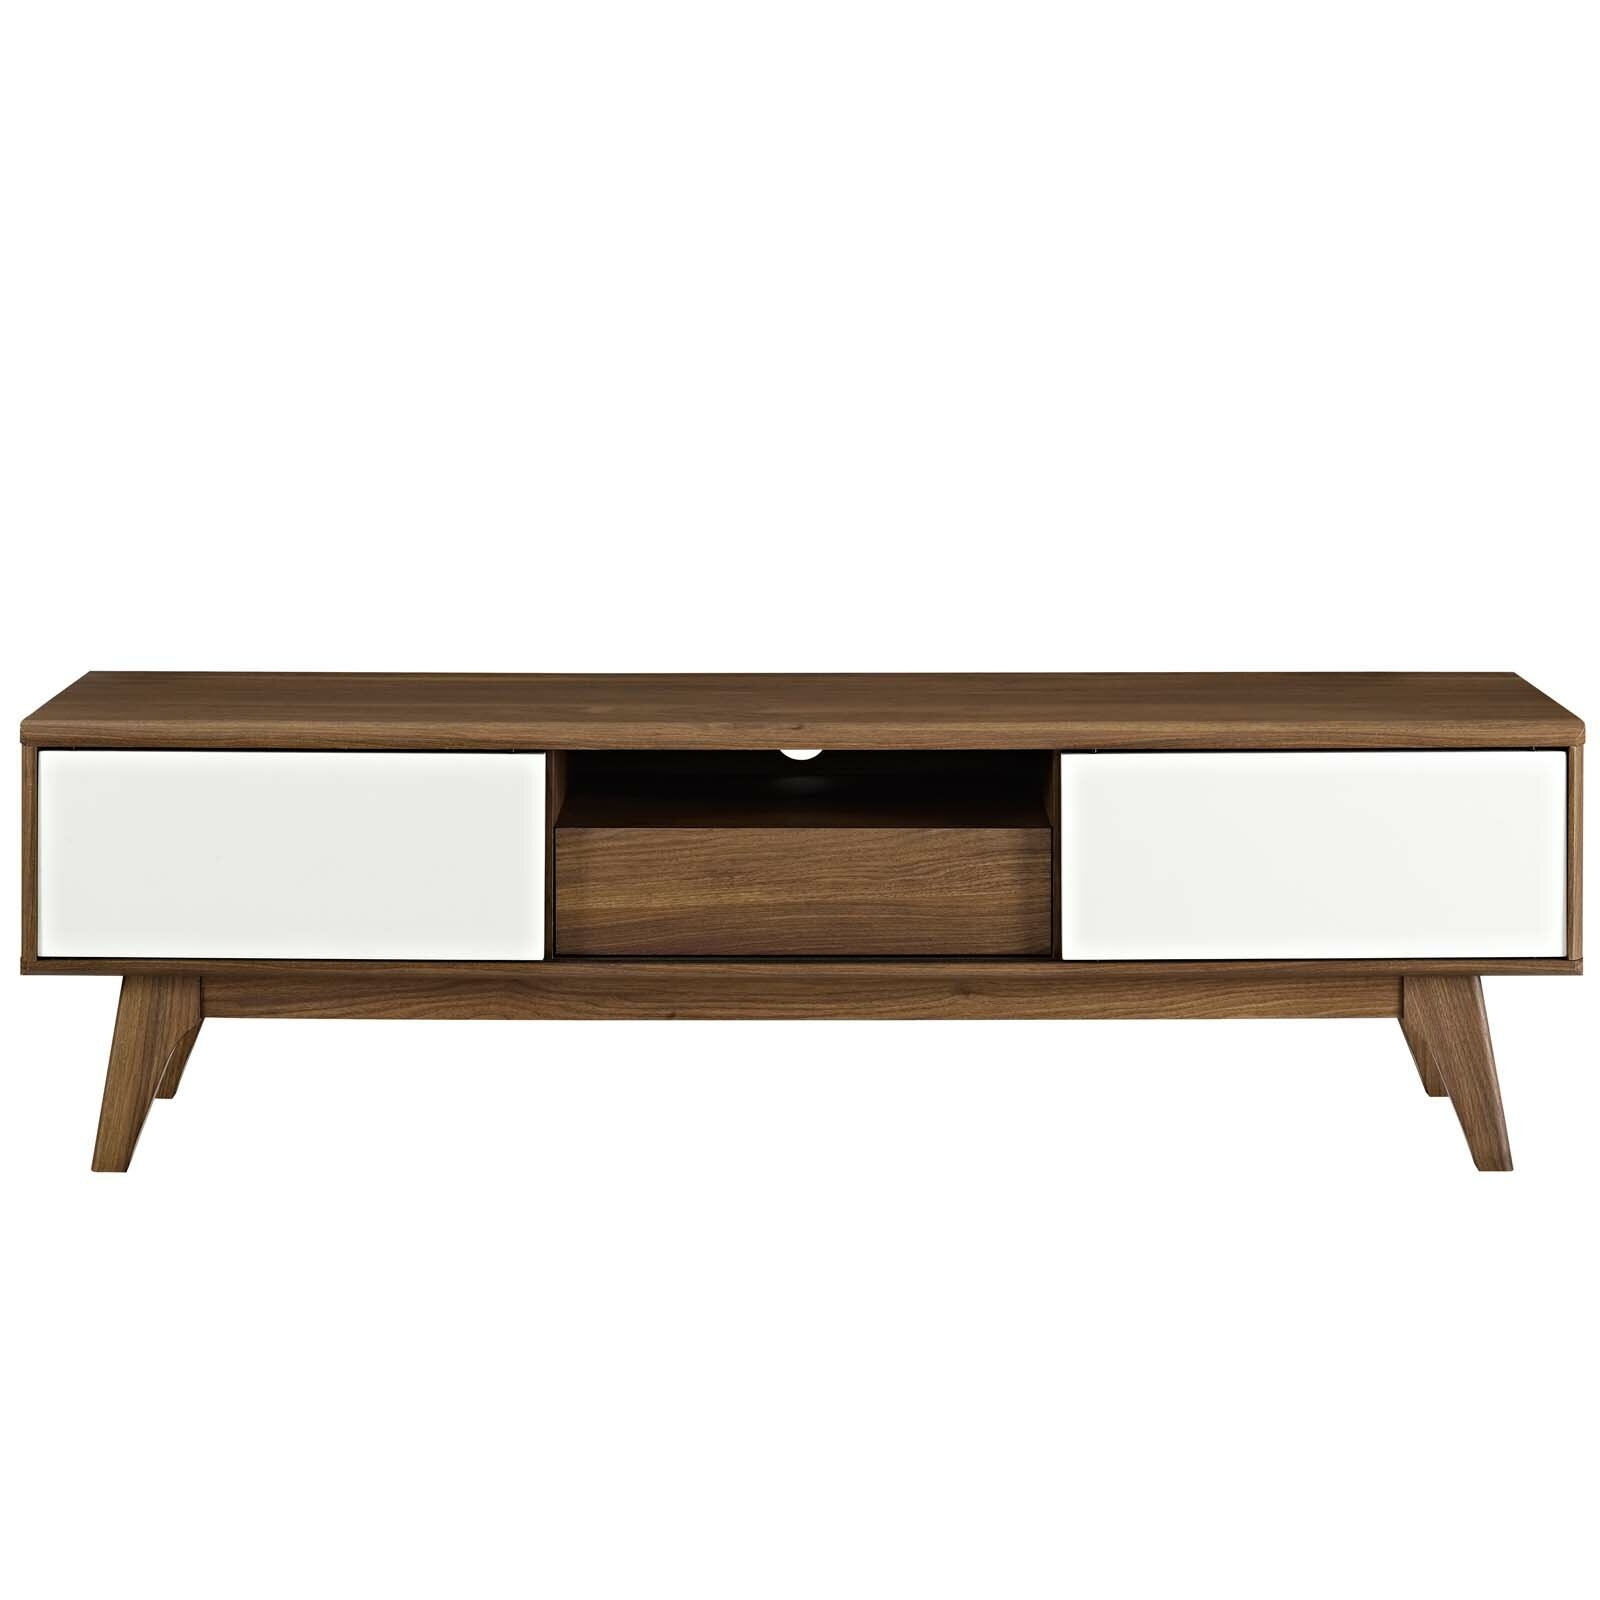 Bates TV Stand for TVs up to 65" - Image 1